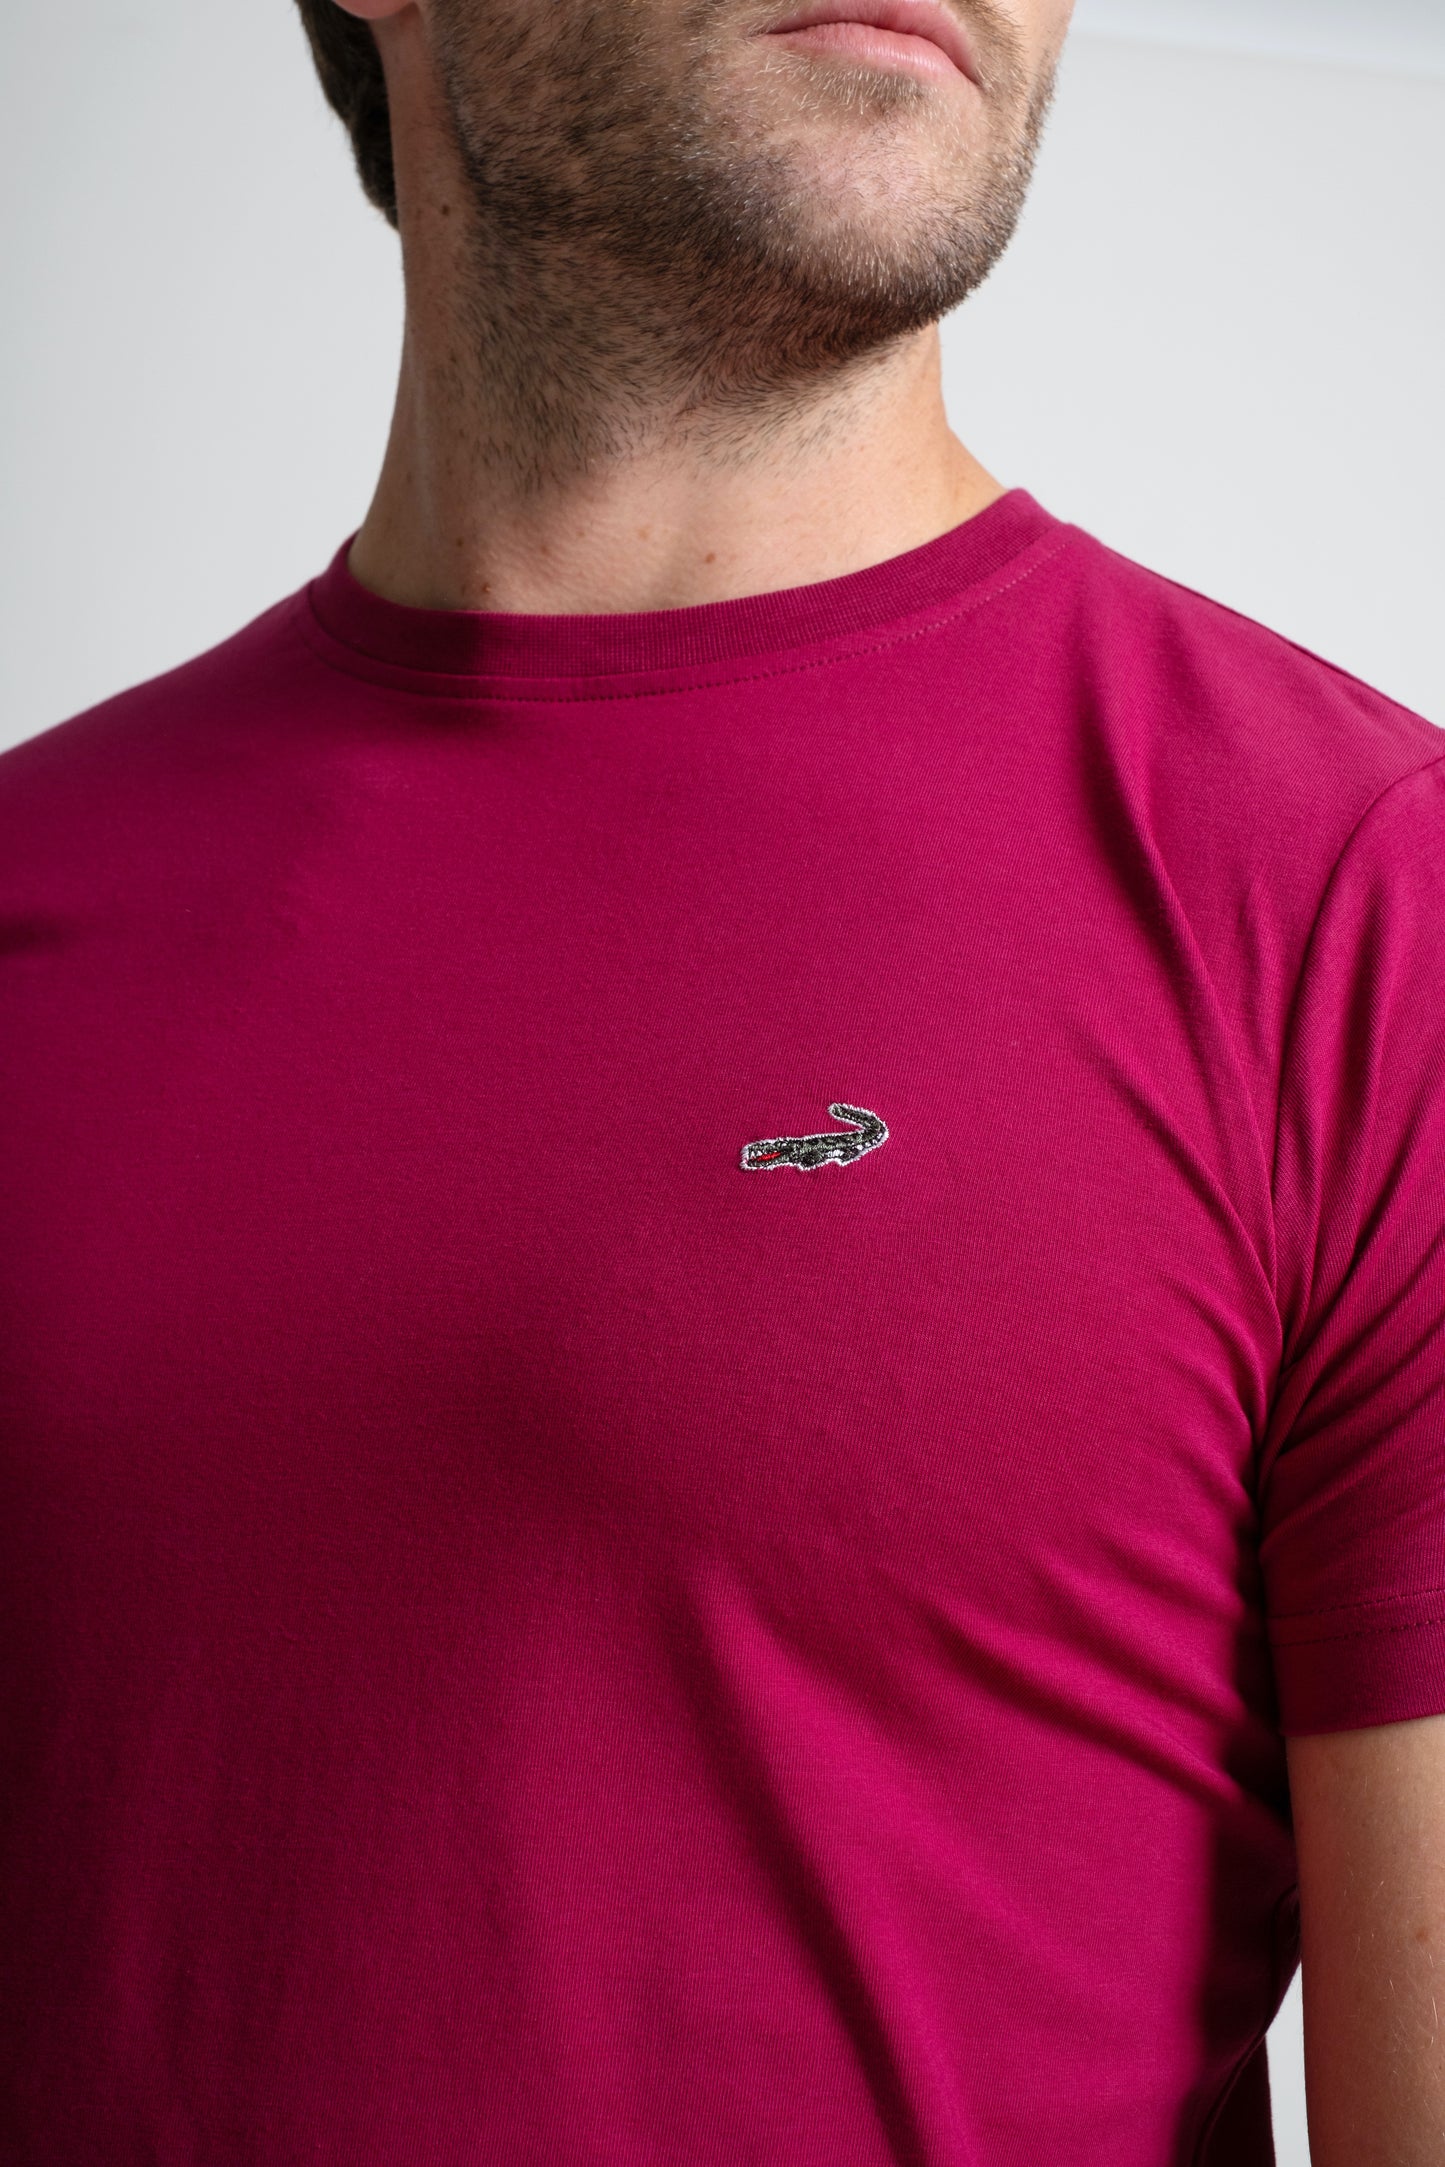 Action Fit Short sleeves-CasualCrew Neck - Persian Red